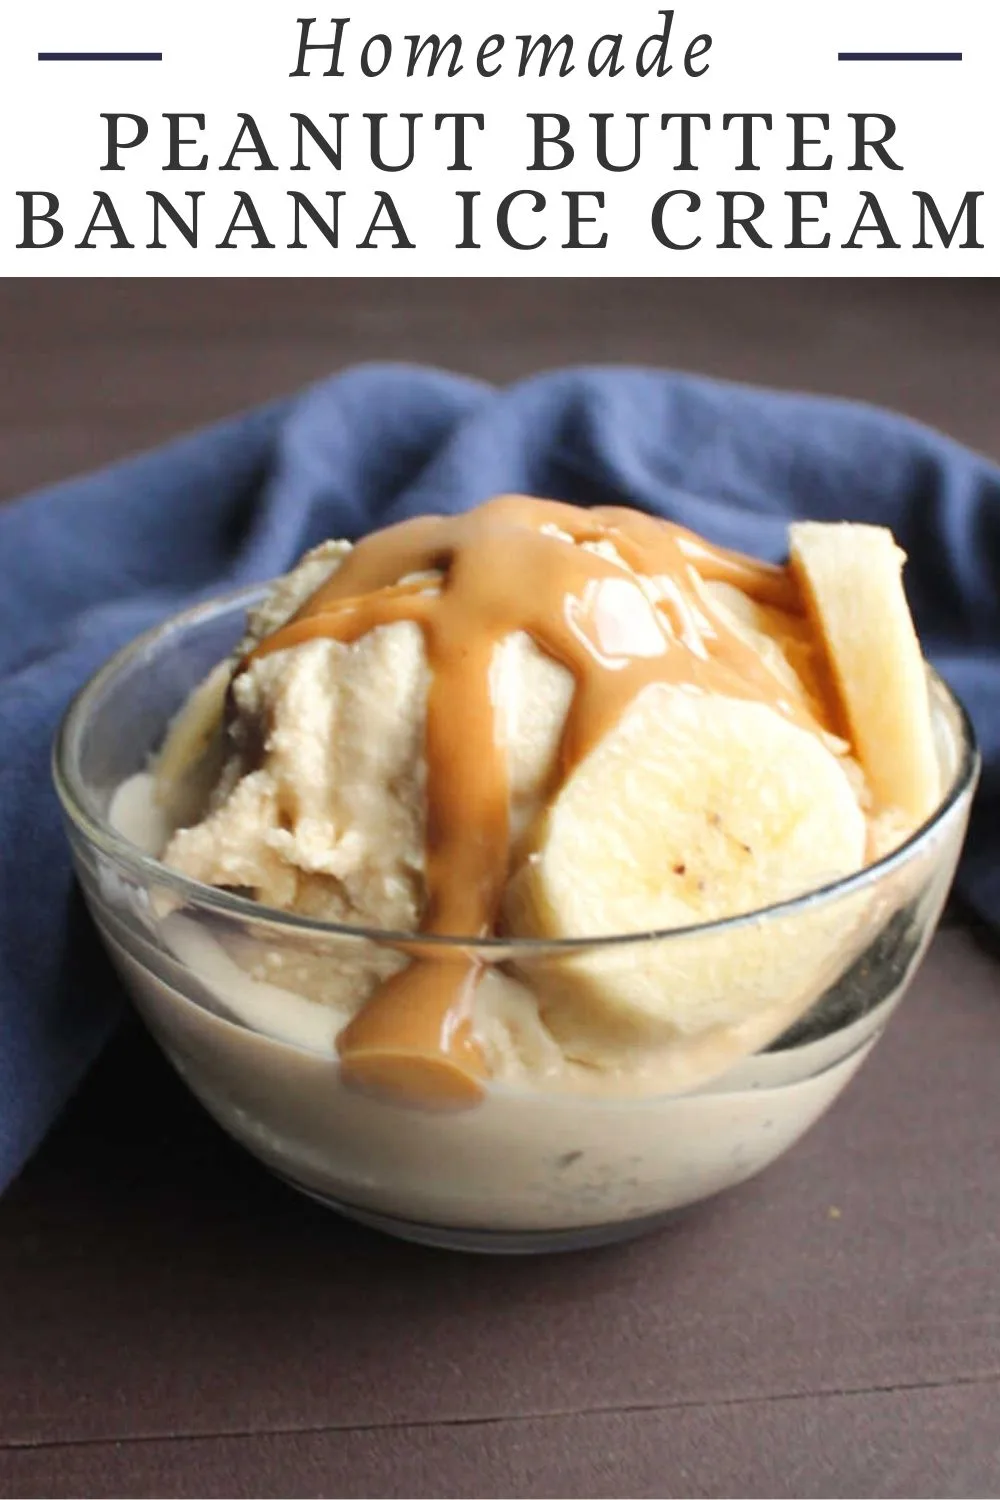 The flavor combination of peanut butter, honey and bananas is a classic for good reason. It's that sweet, salty depth of flavor that draws you in. Making it into homemade ice cream makes it extra delicious.  It will be a fun addition to your homemade ice cream rotation.